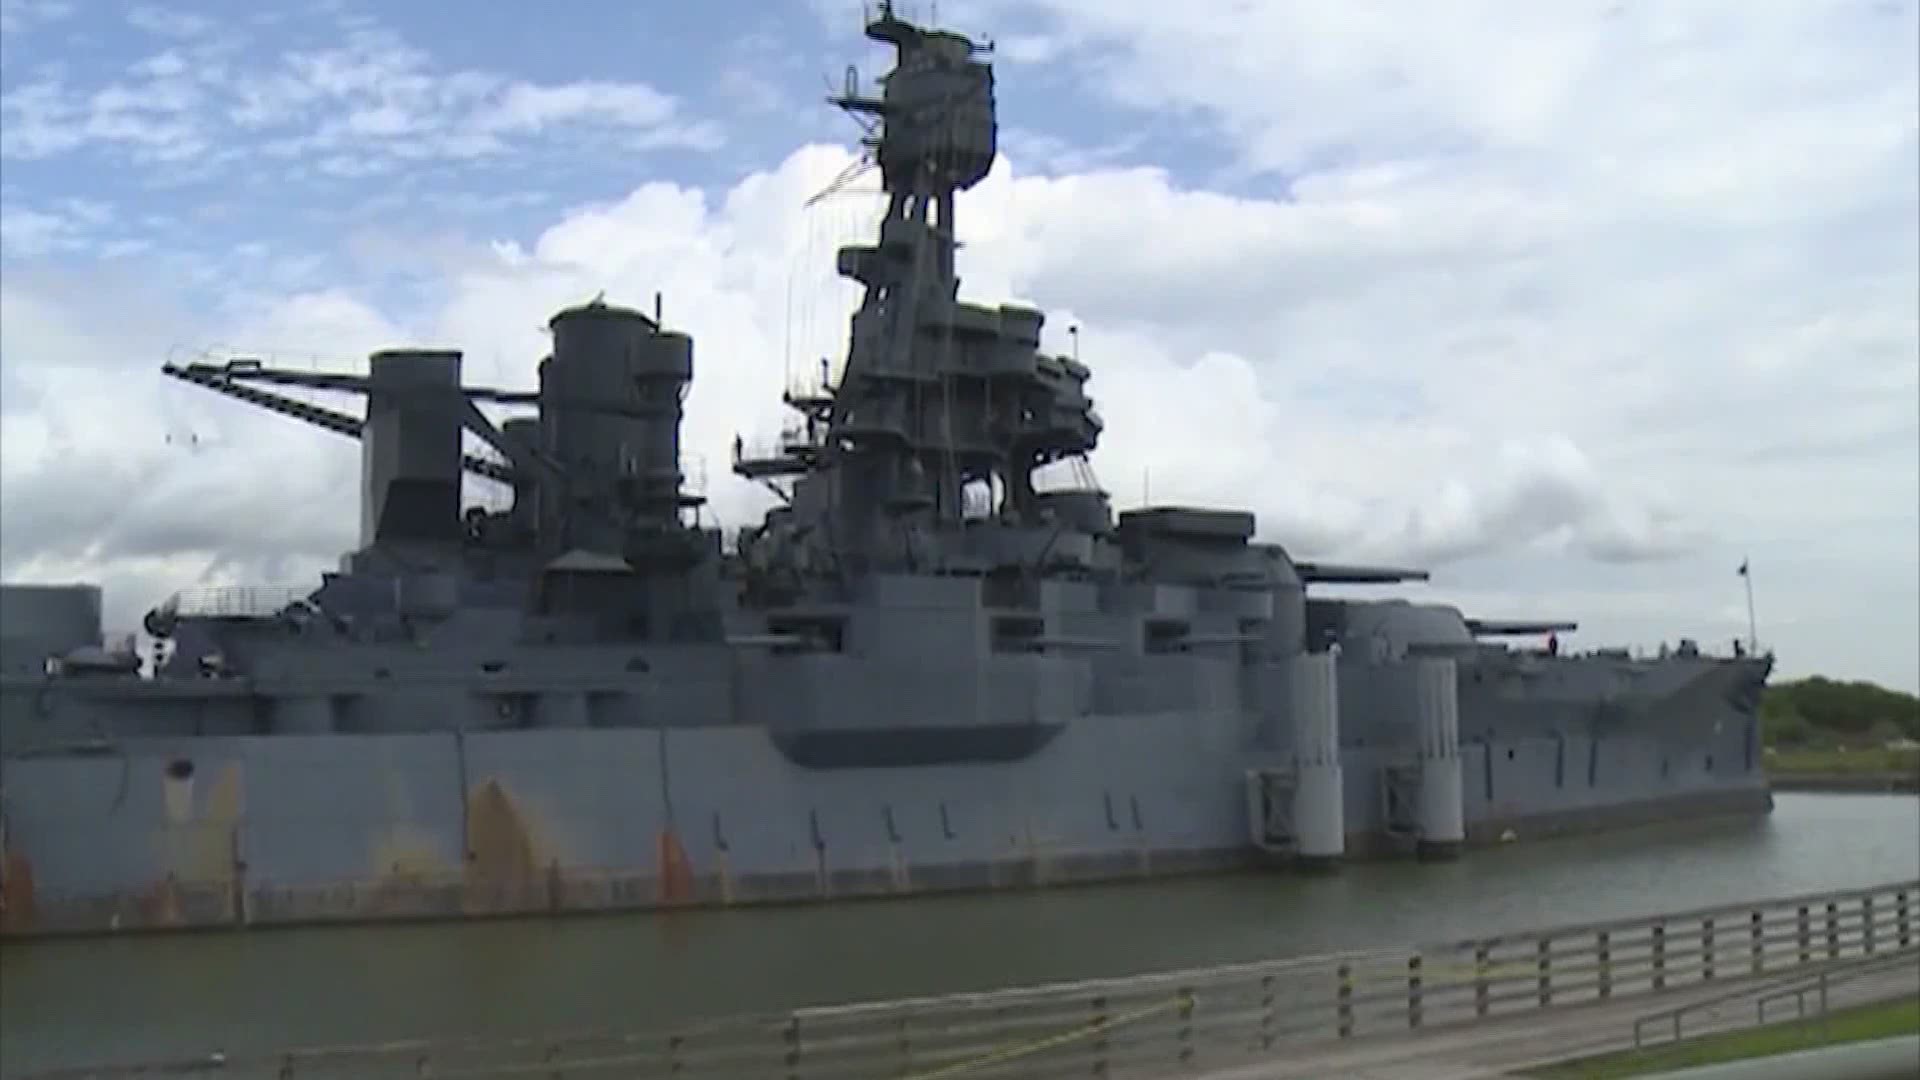 The Battleship Texas has been closed to the public since August 2019 to allow preparations for her transport to a shipyard for extensive restoration.